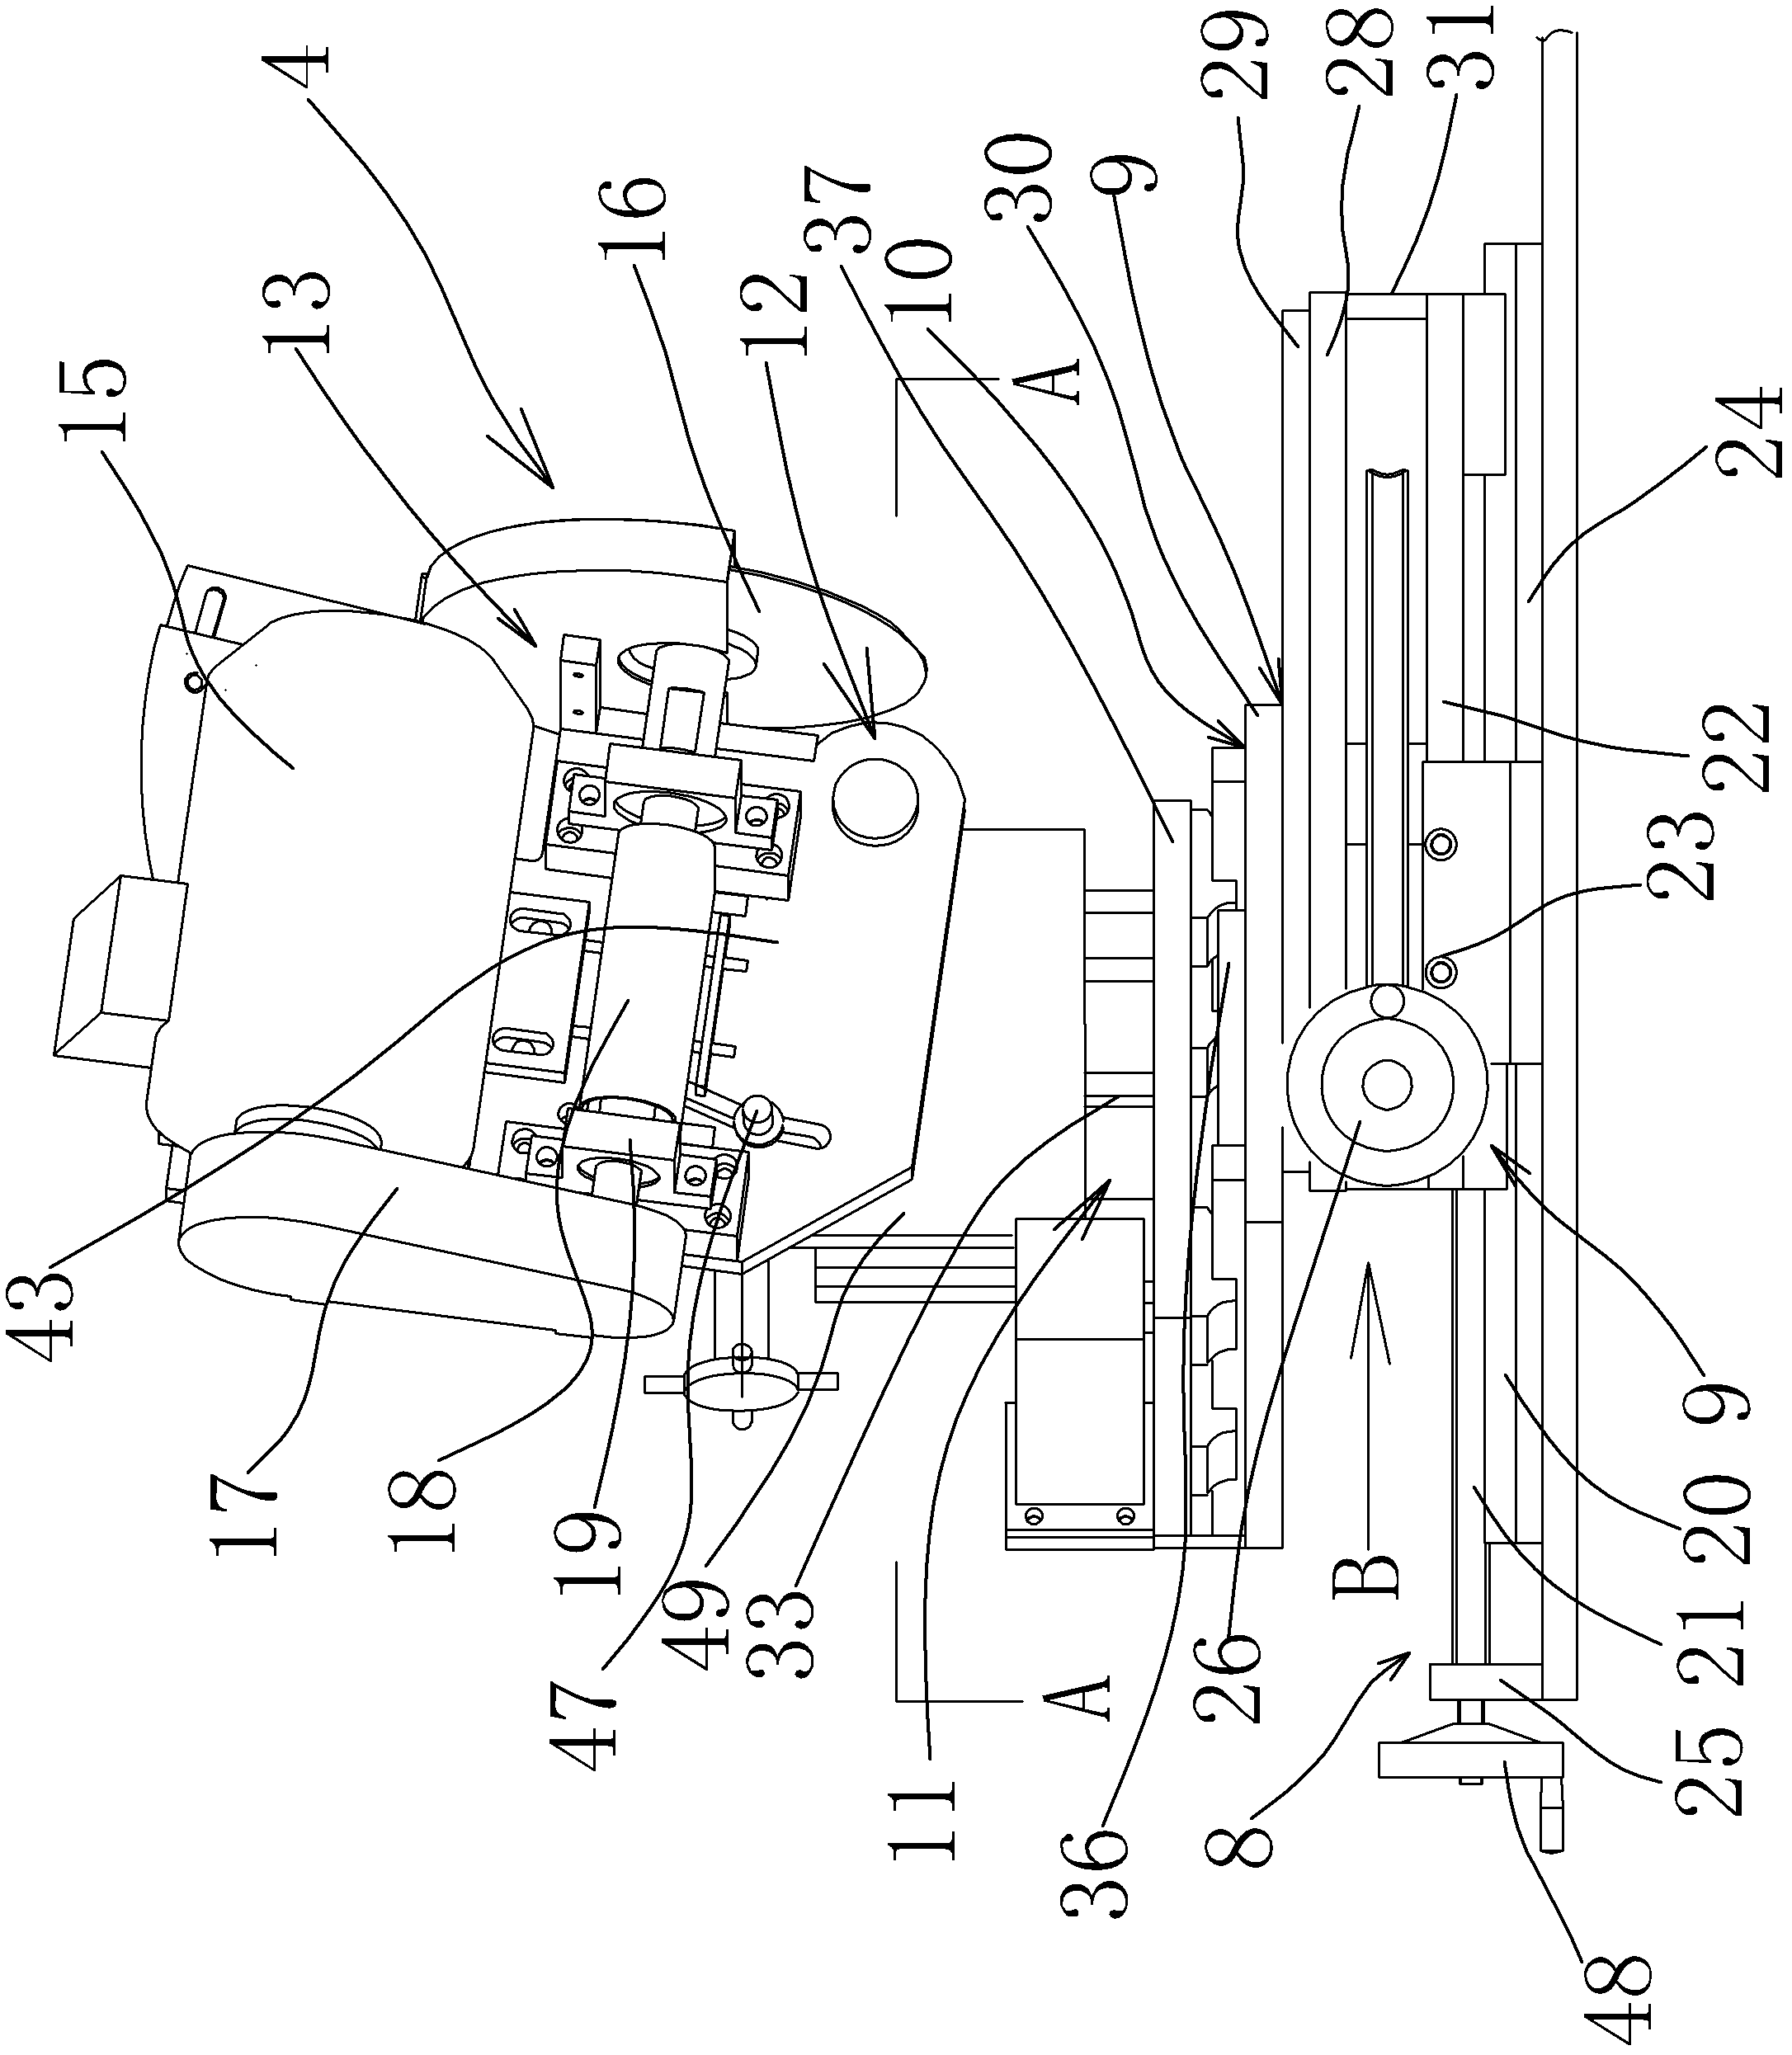 End trimming device for automobile decorative strips